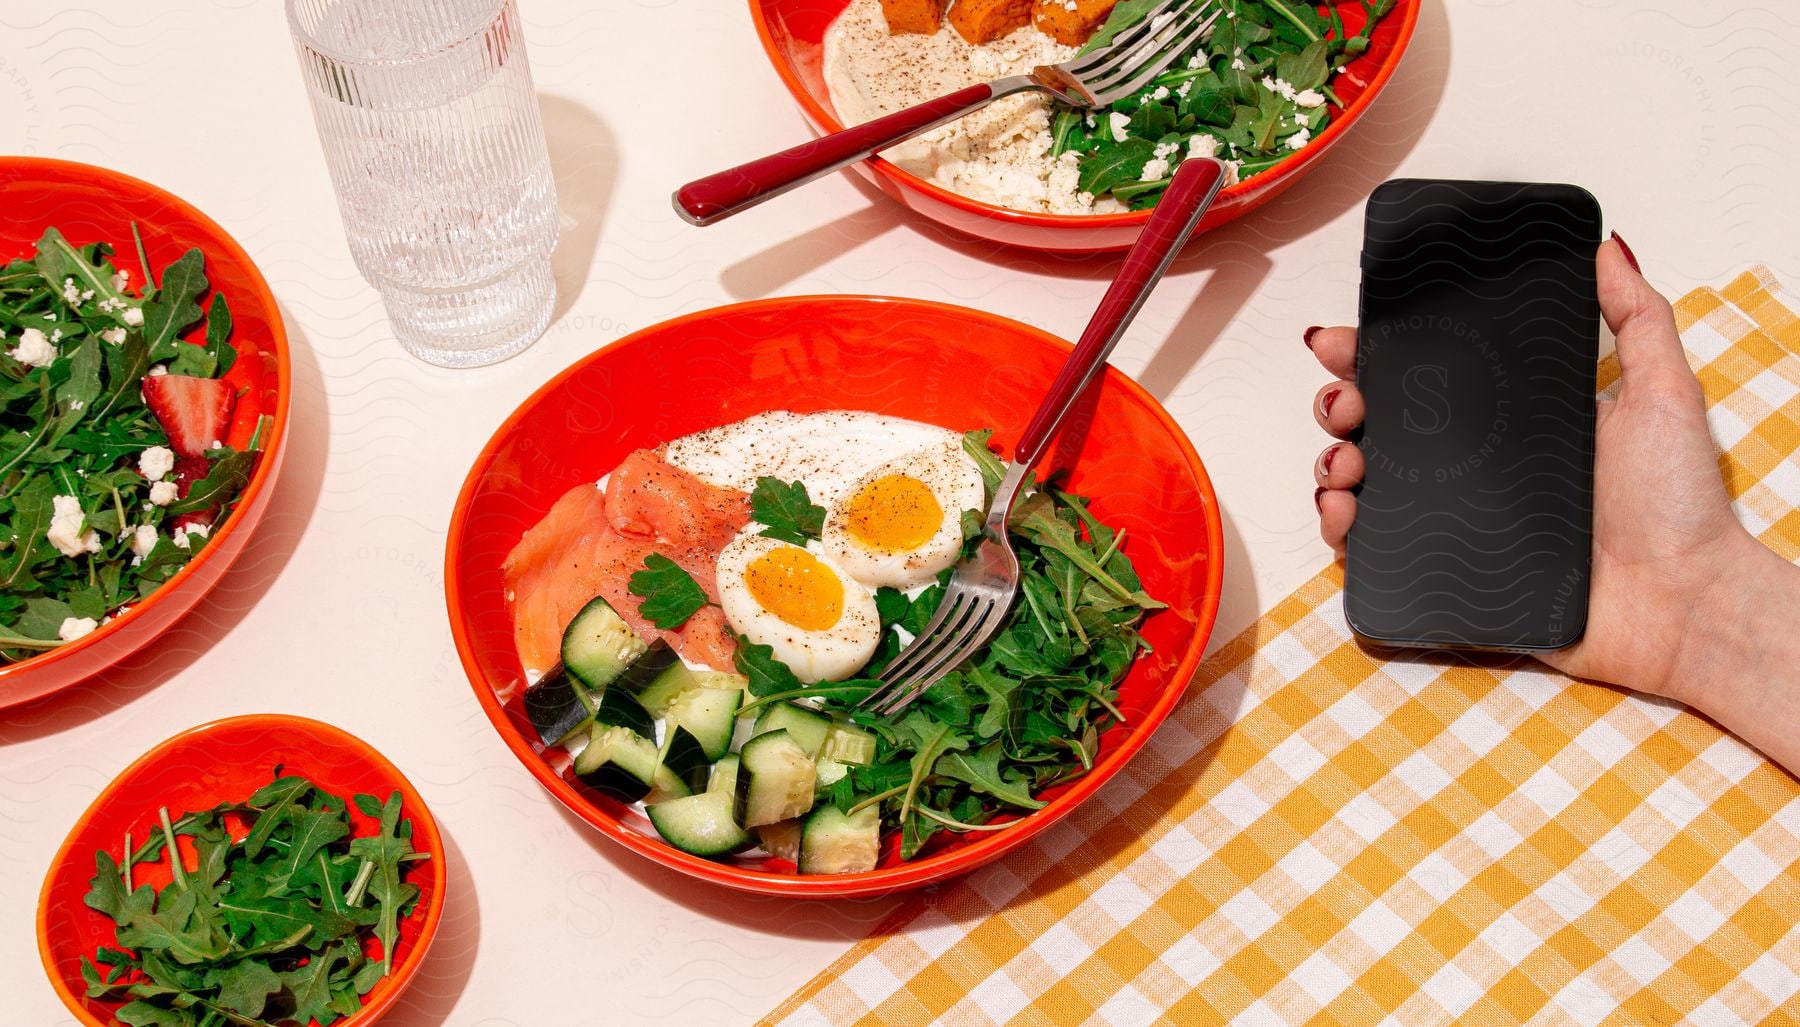 Stock photo of person holding a cell phone in front of a bowl of food with vegetables, including lettuce, tomatoes, cucumbers, and hard-boiled eggs.